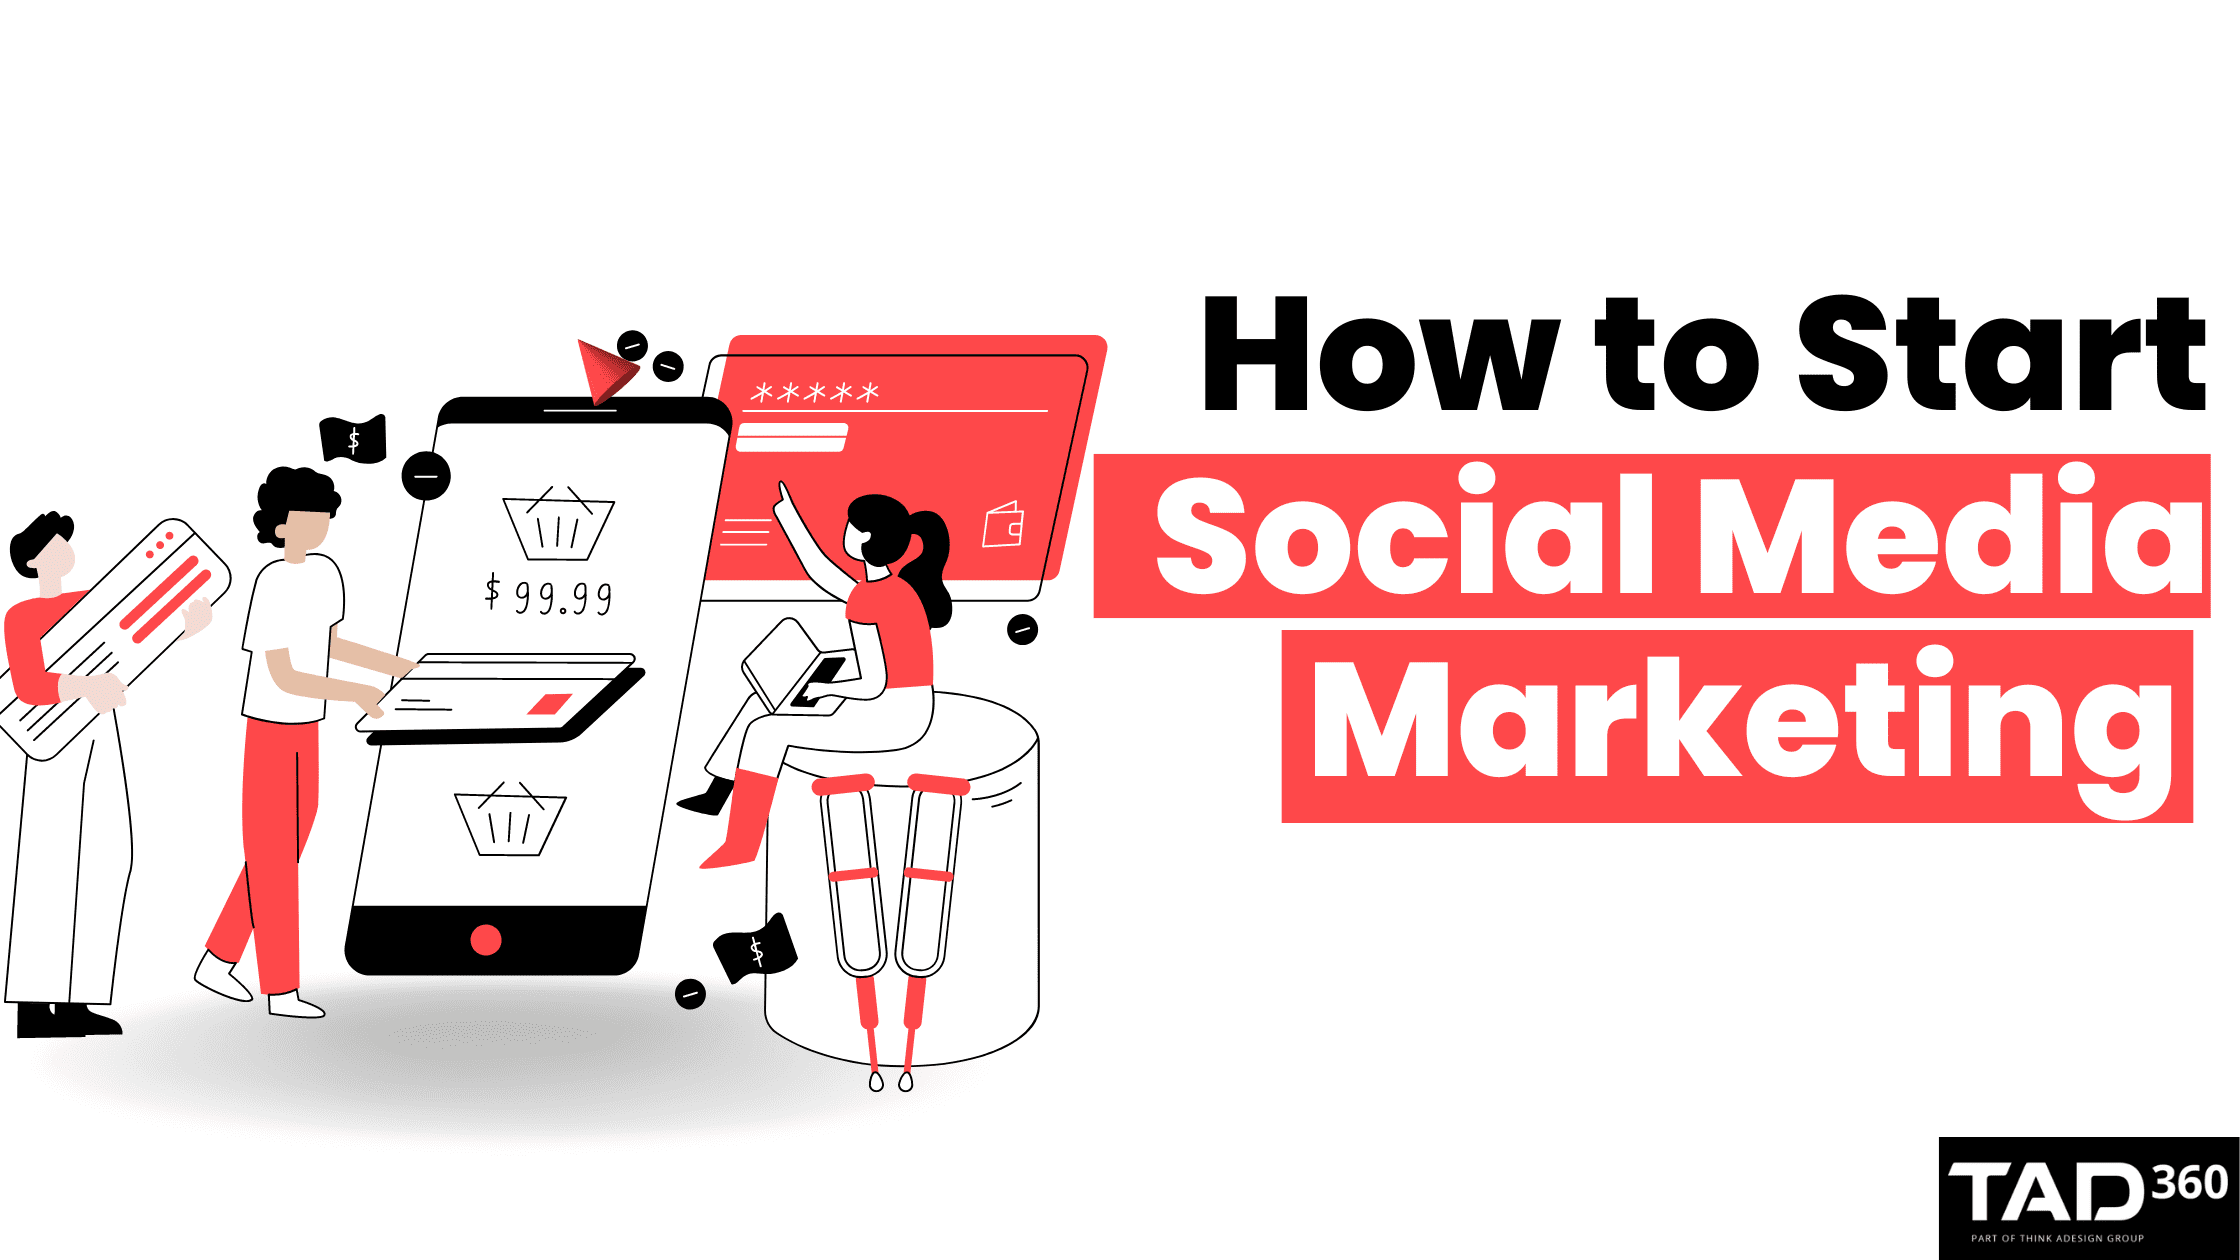 How to Start Social Media Marketing (4 ESSENTIAL Tips for Beginners)